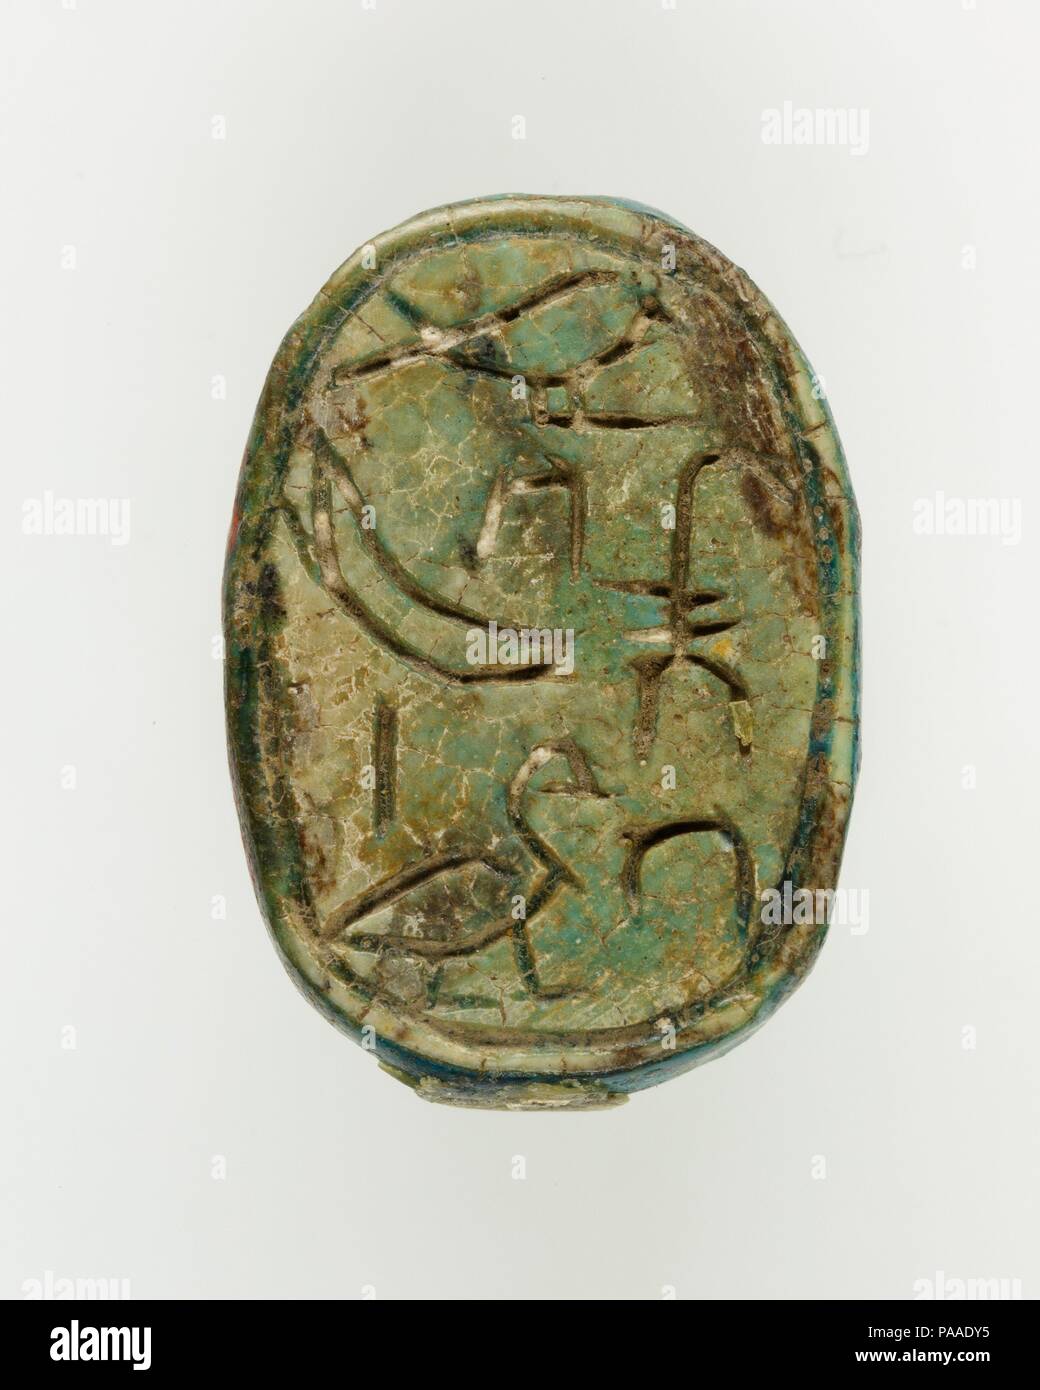 Scarab of an Official. Dimensions: L. 2.3 cm (7/8 in). Dynasty: Dynasty 12-18. Date: ca. 1981-1550 B.C.. Museum: Metropolitan Museum of Art, New York, USA. Stock Photo